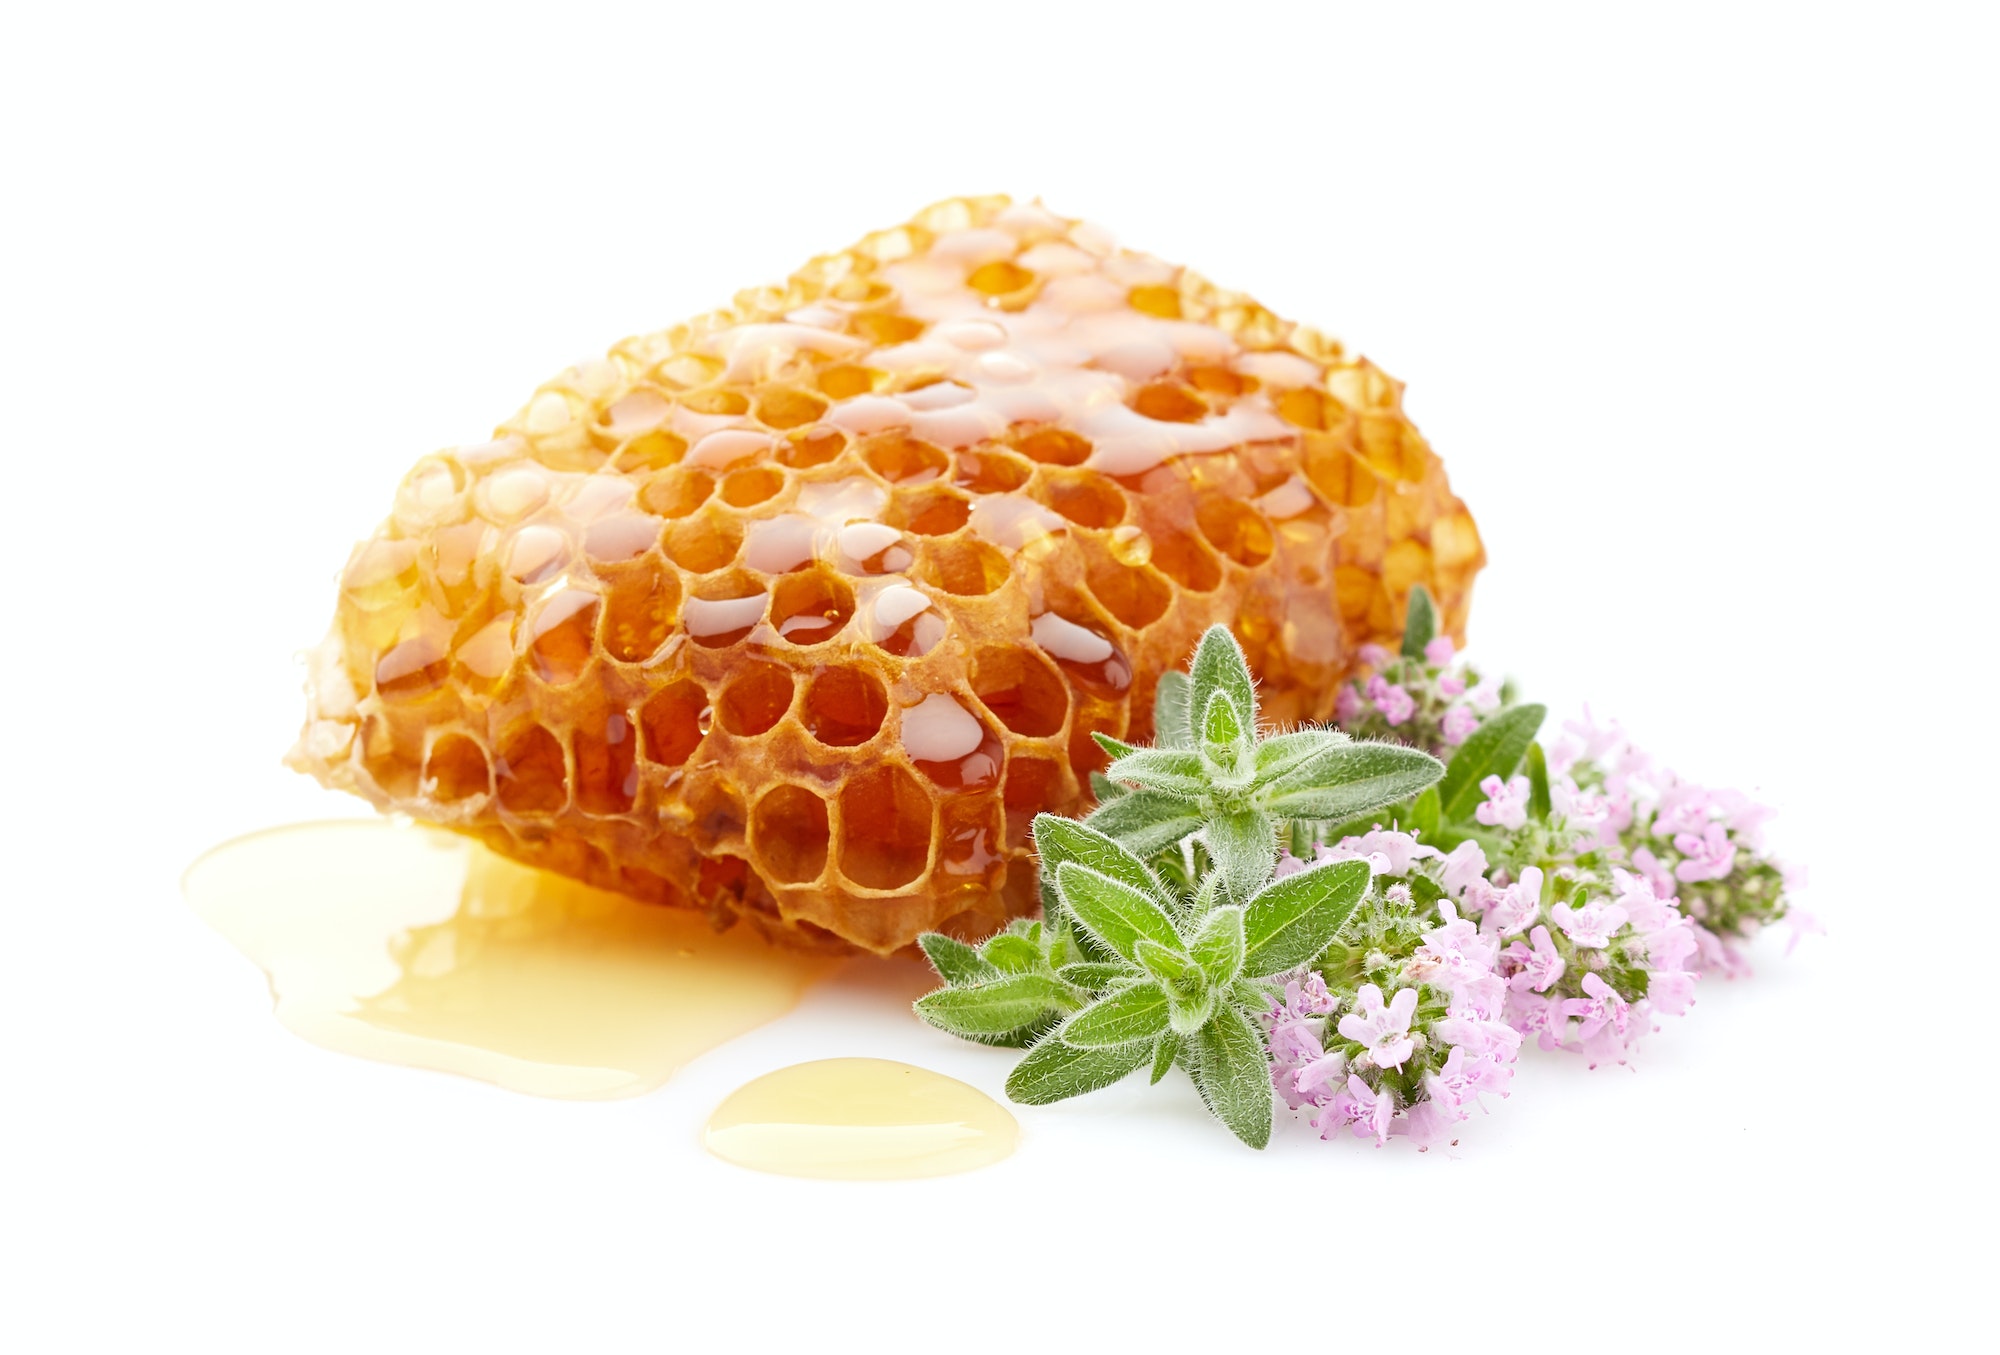 Honeycomb with thyme plant